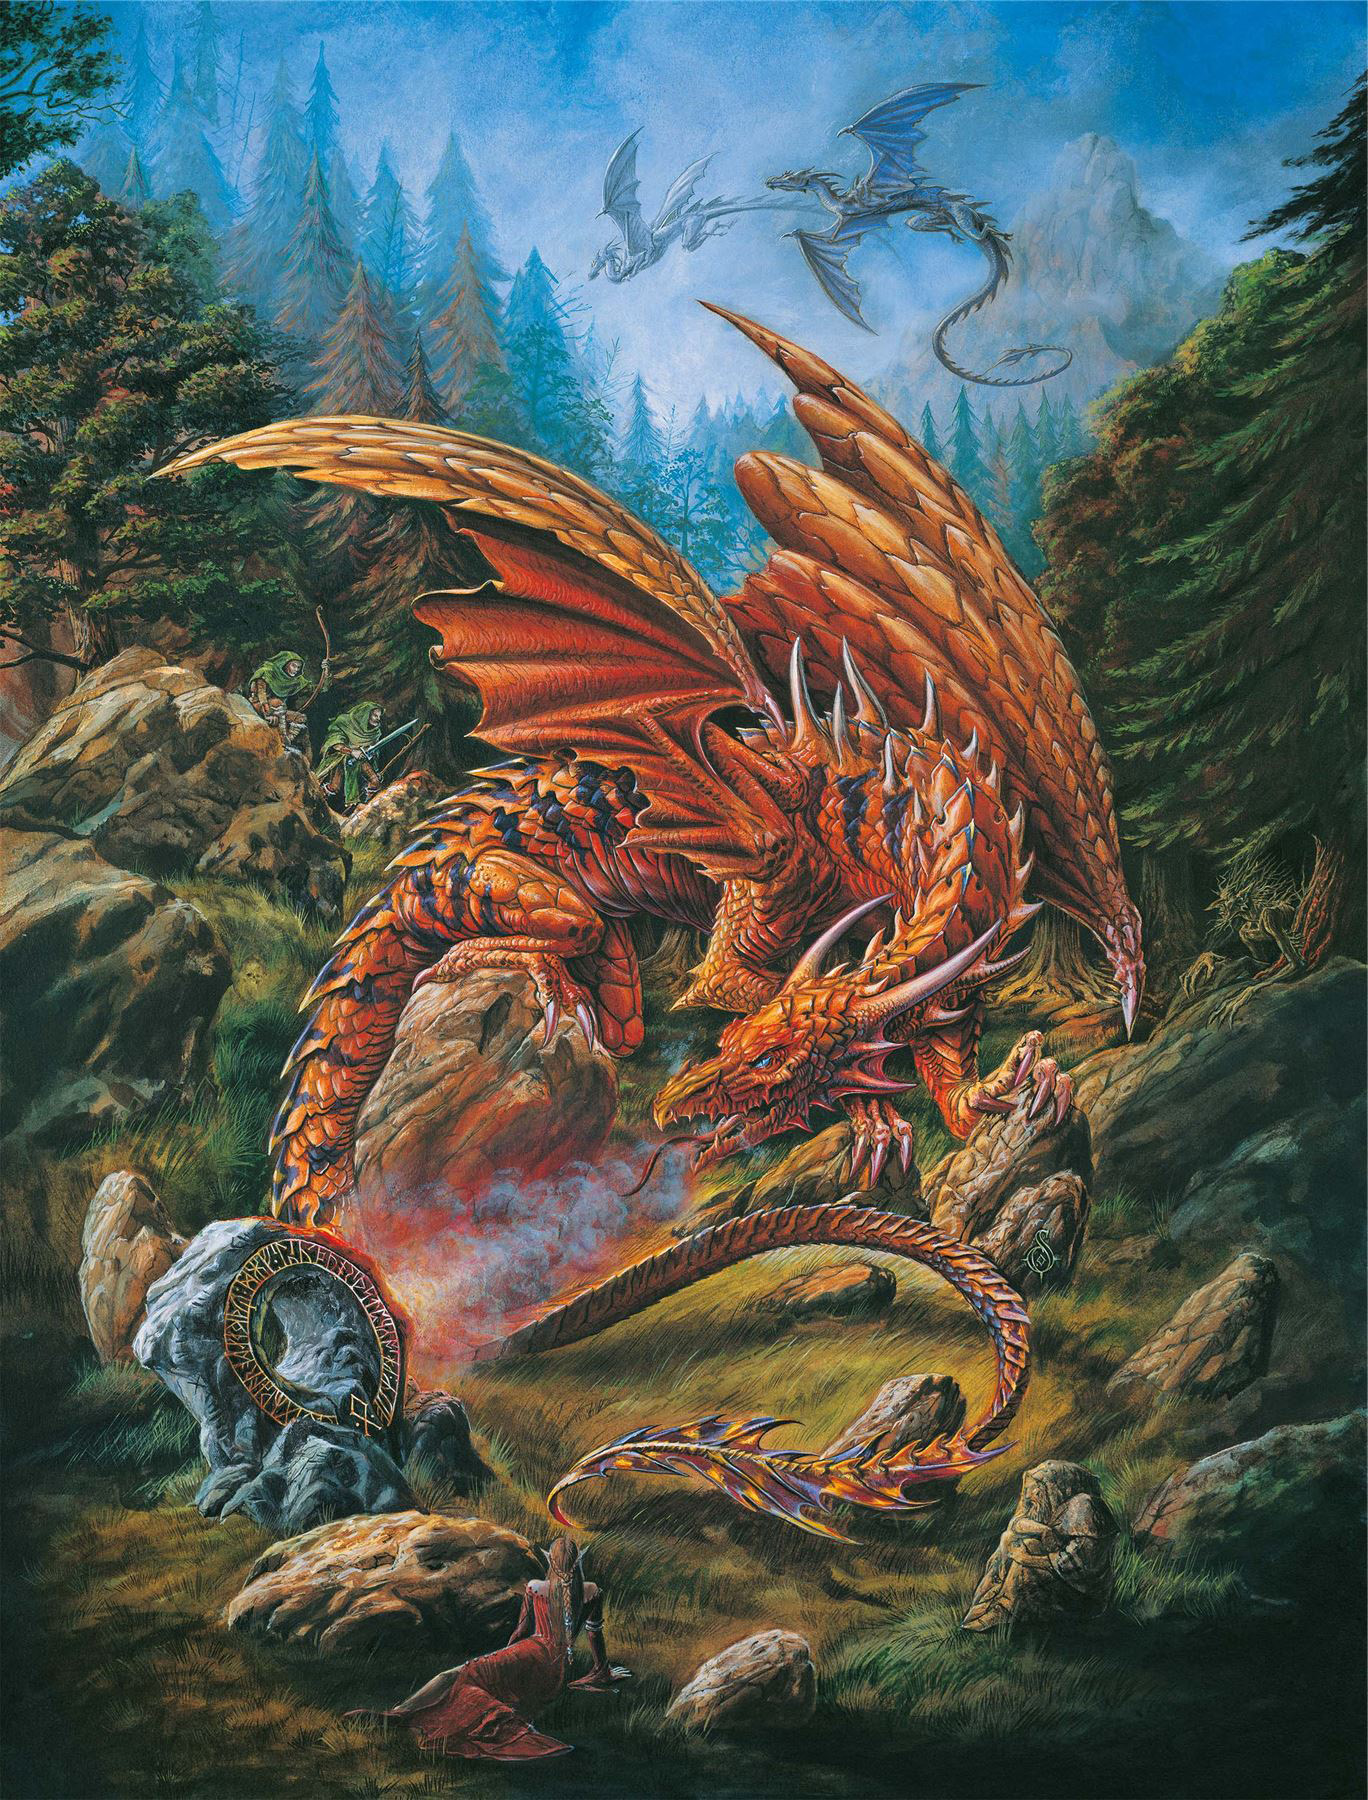 Dragons of the Runering